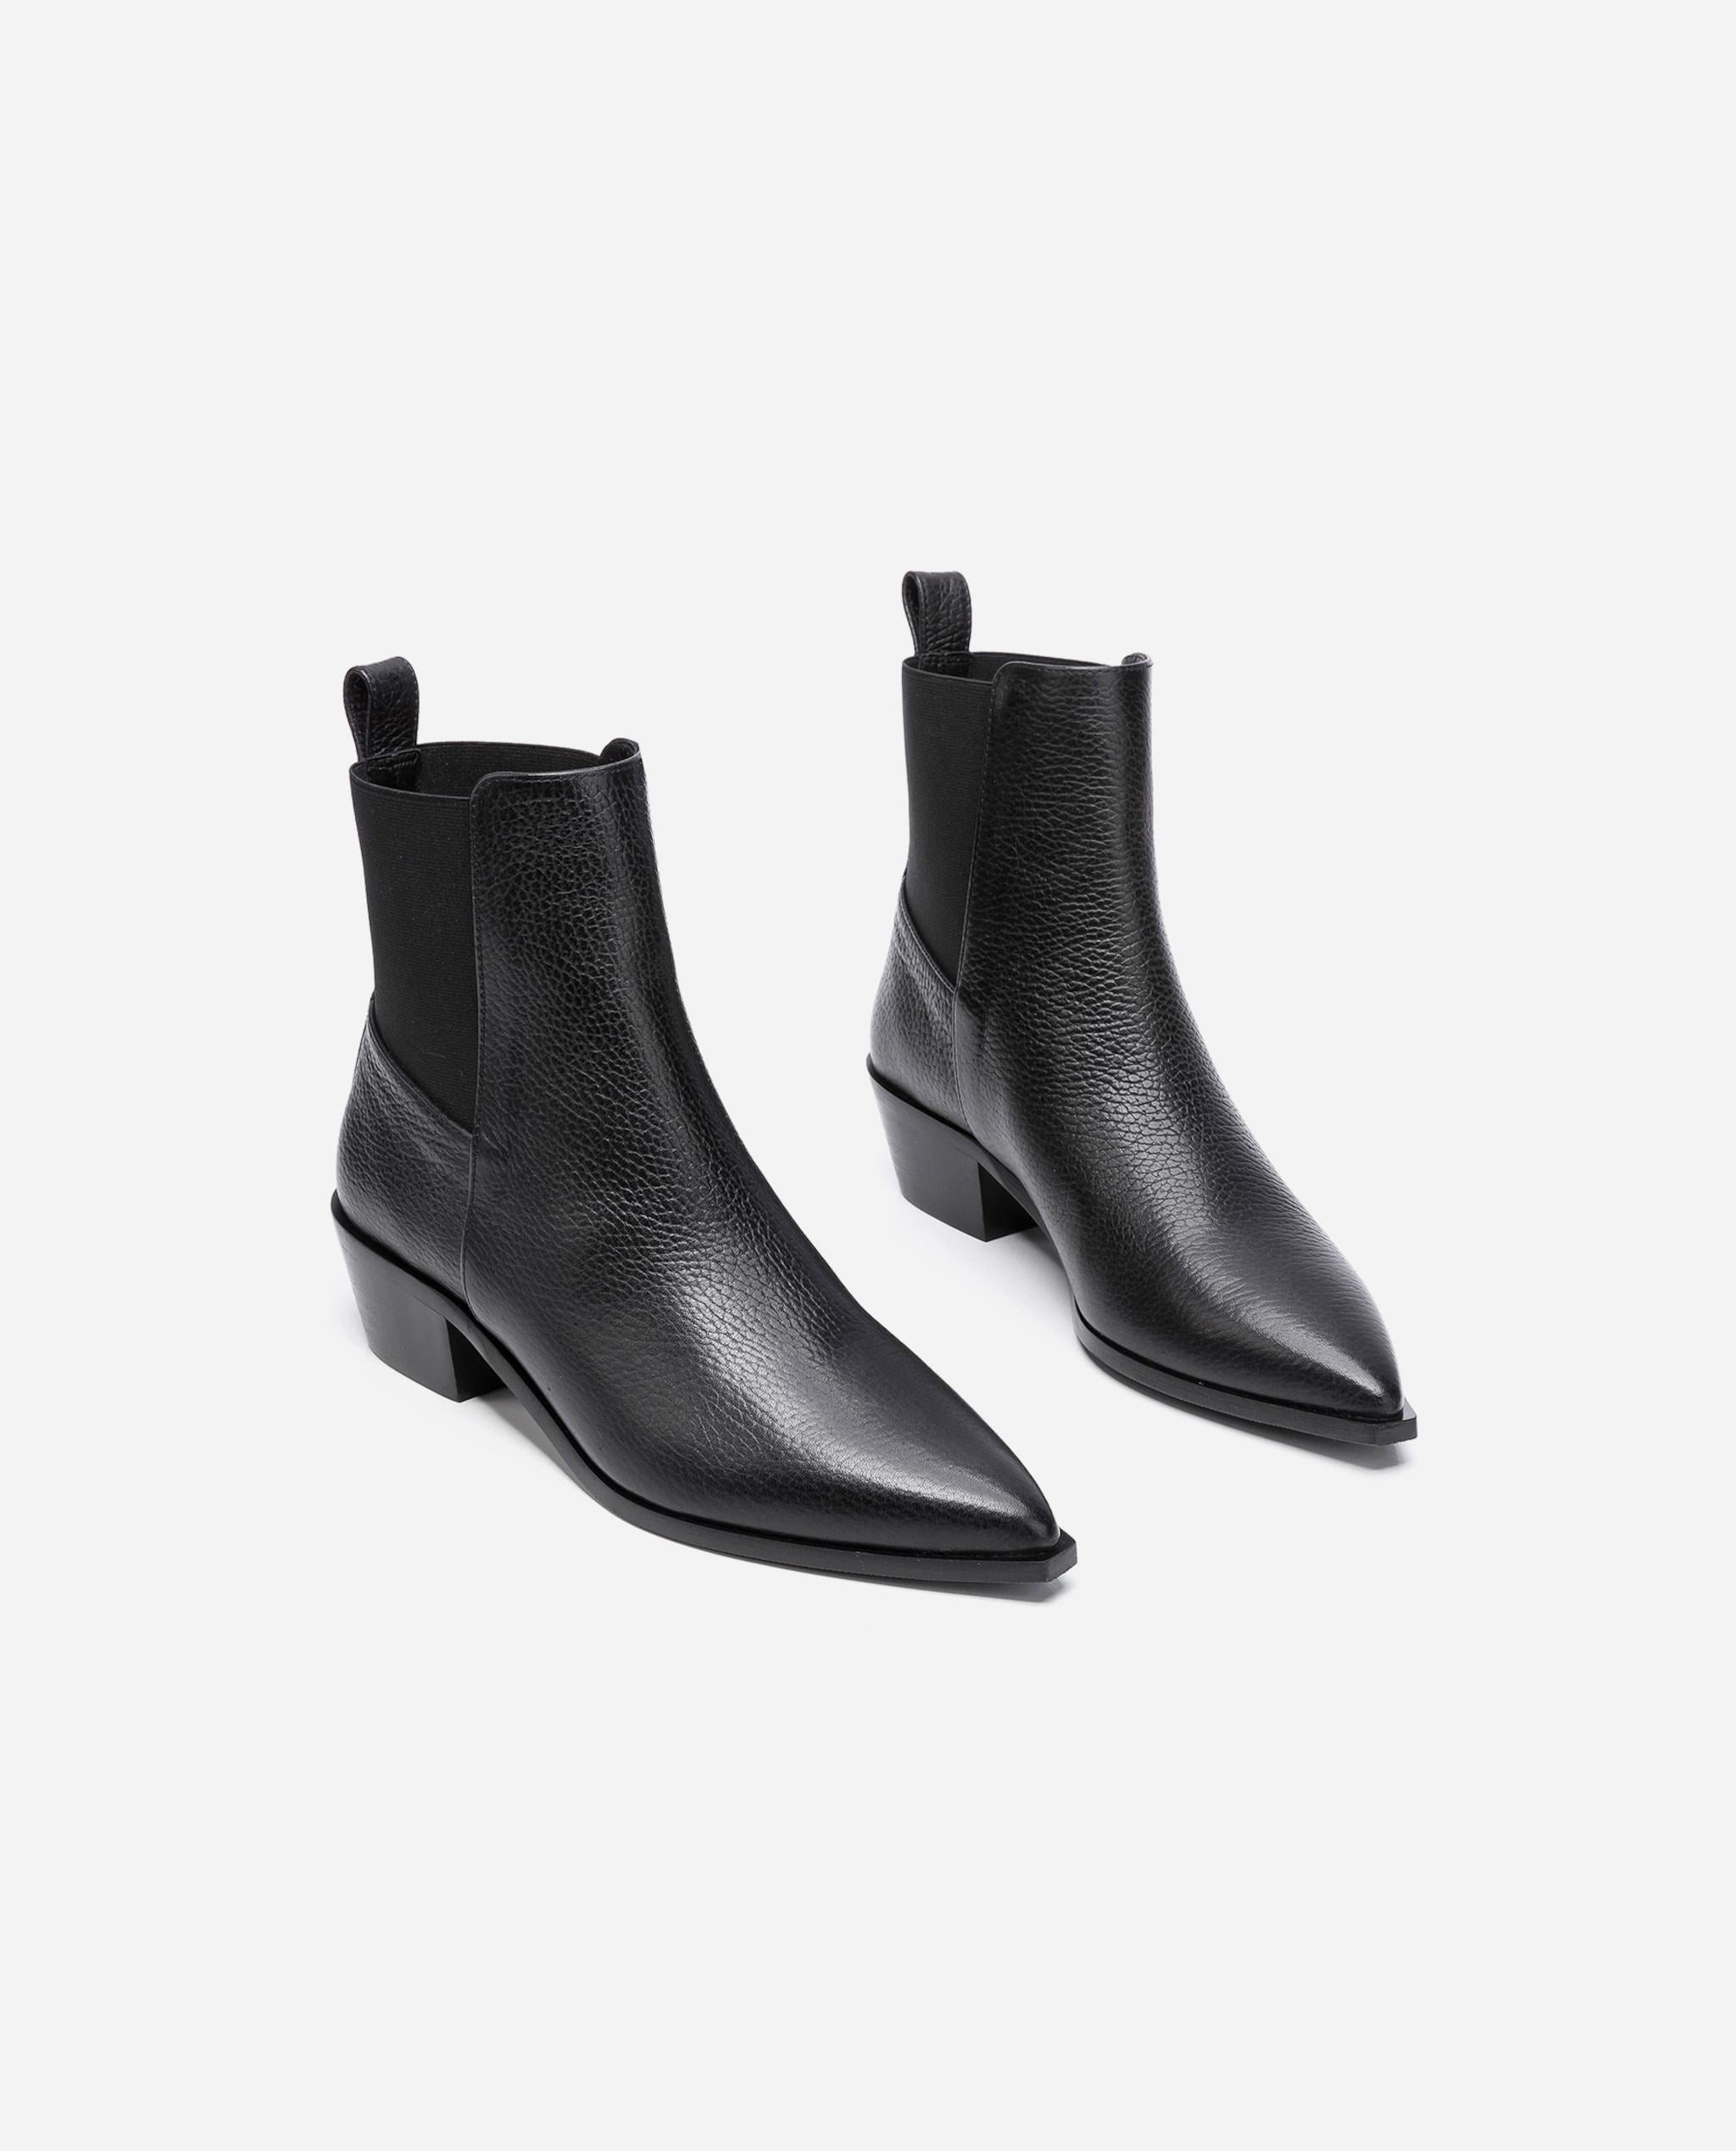 Willow Leather Black Boots 20020814701-001 - 2